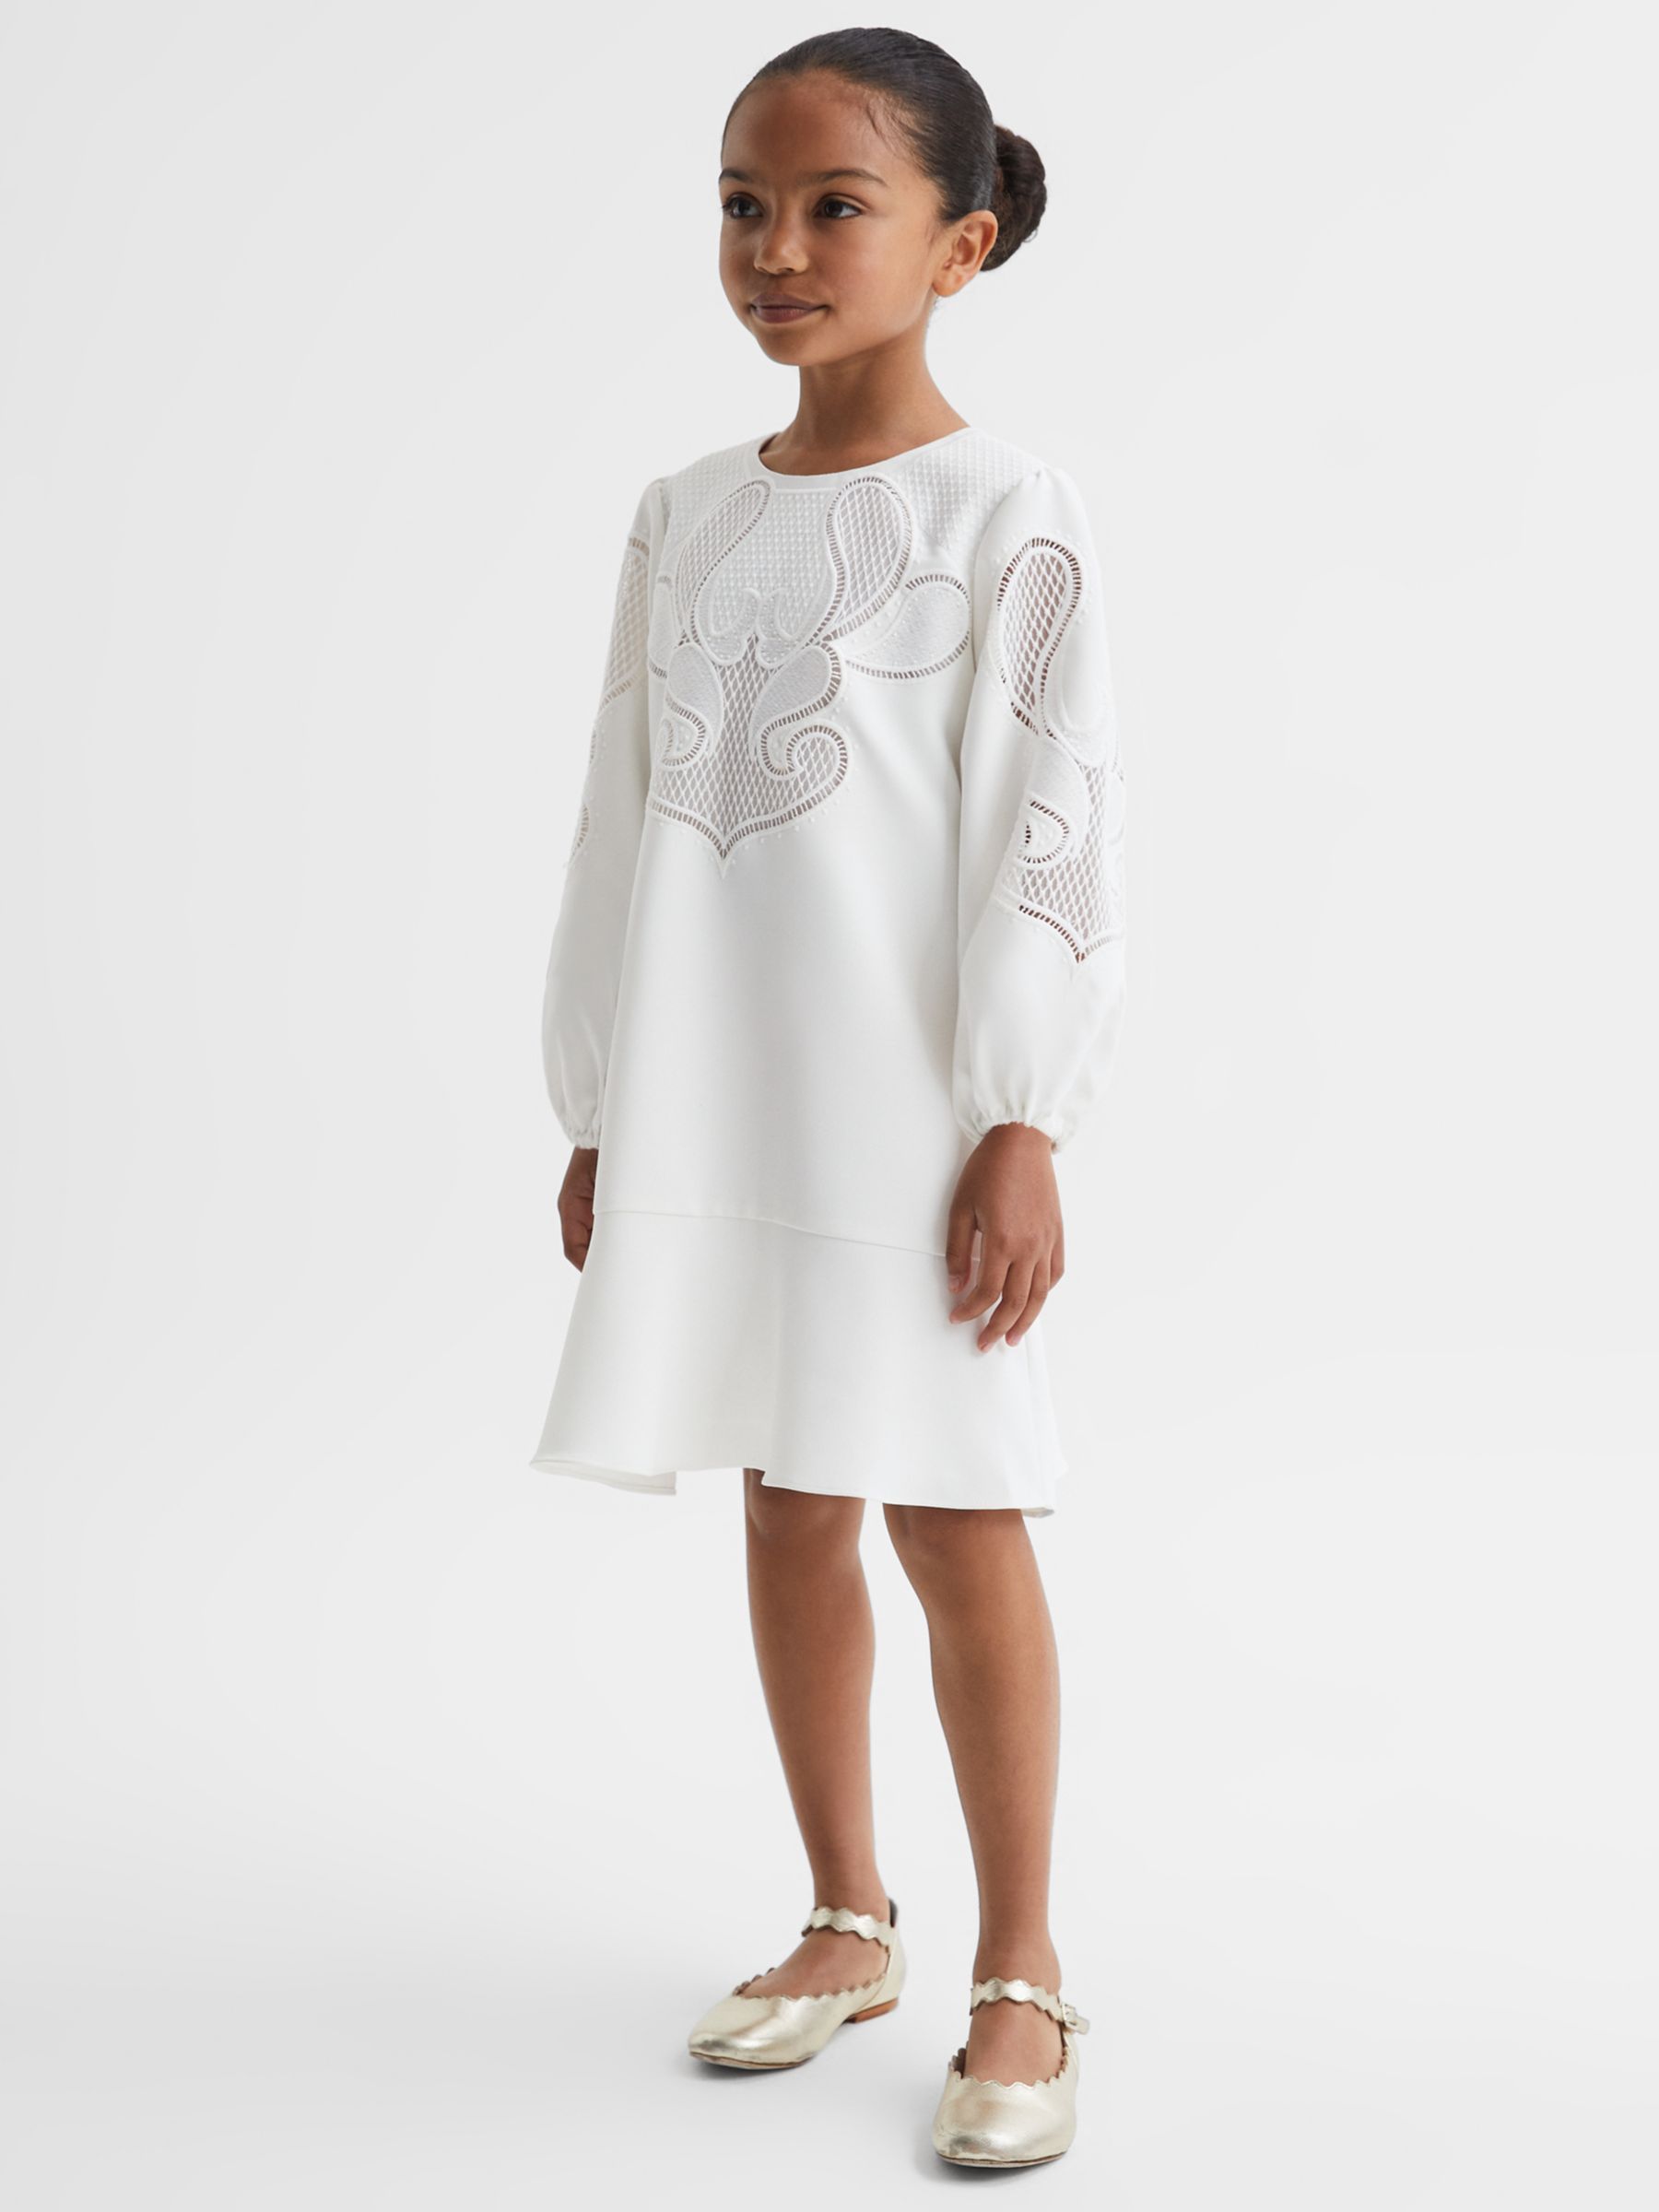 Reiss Kids' Toya Floral Embroidered Dress, Ivory, 11-12 years